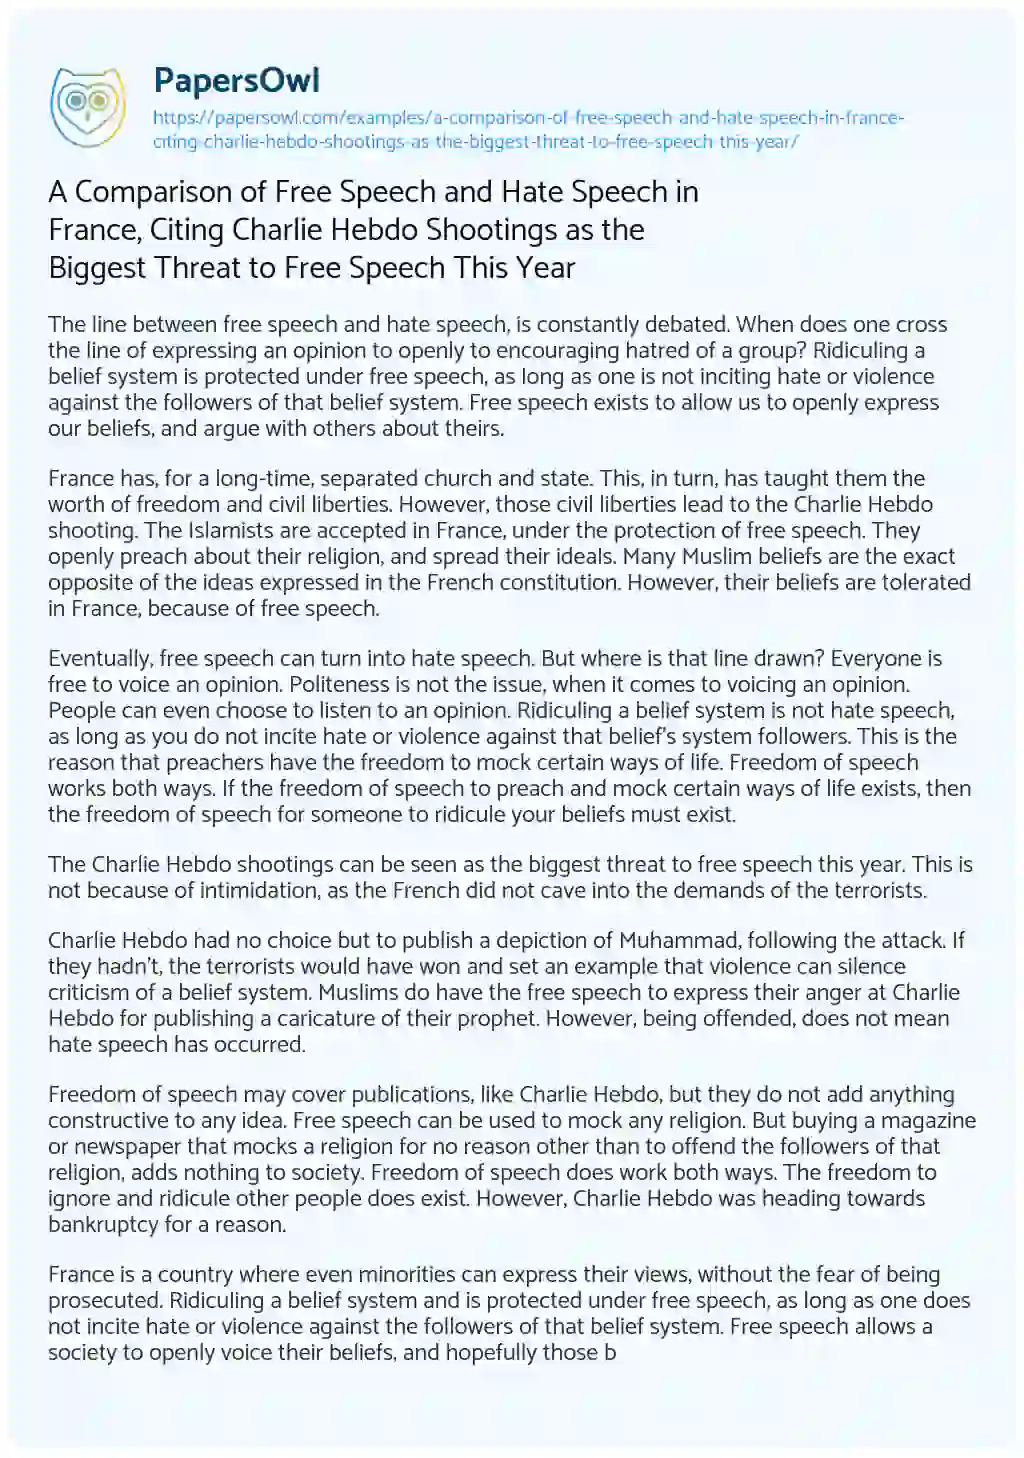 Essay on A Comparison of Free Speech and Hate Speech in France, Citing Charlie Hebdo Shootings as the Biggest Threat to Free Speech this Year